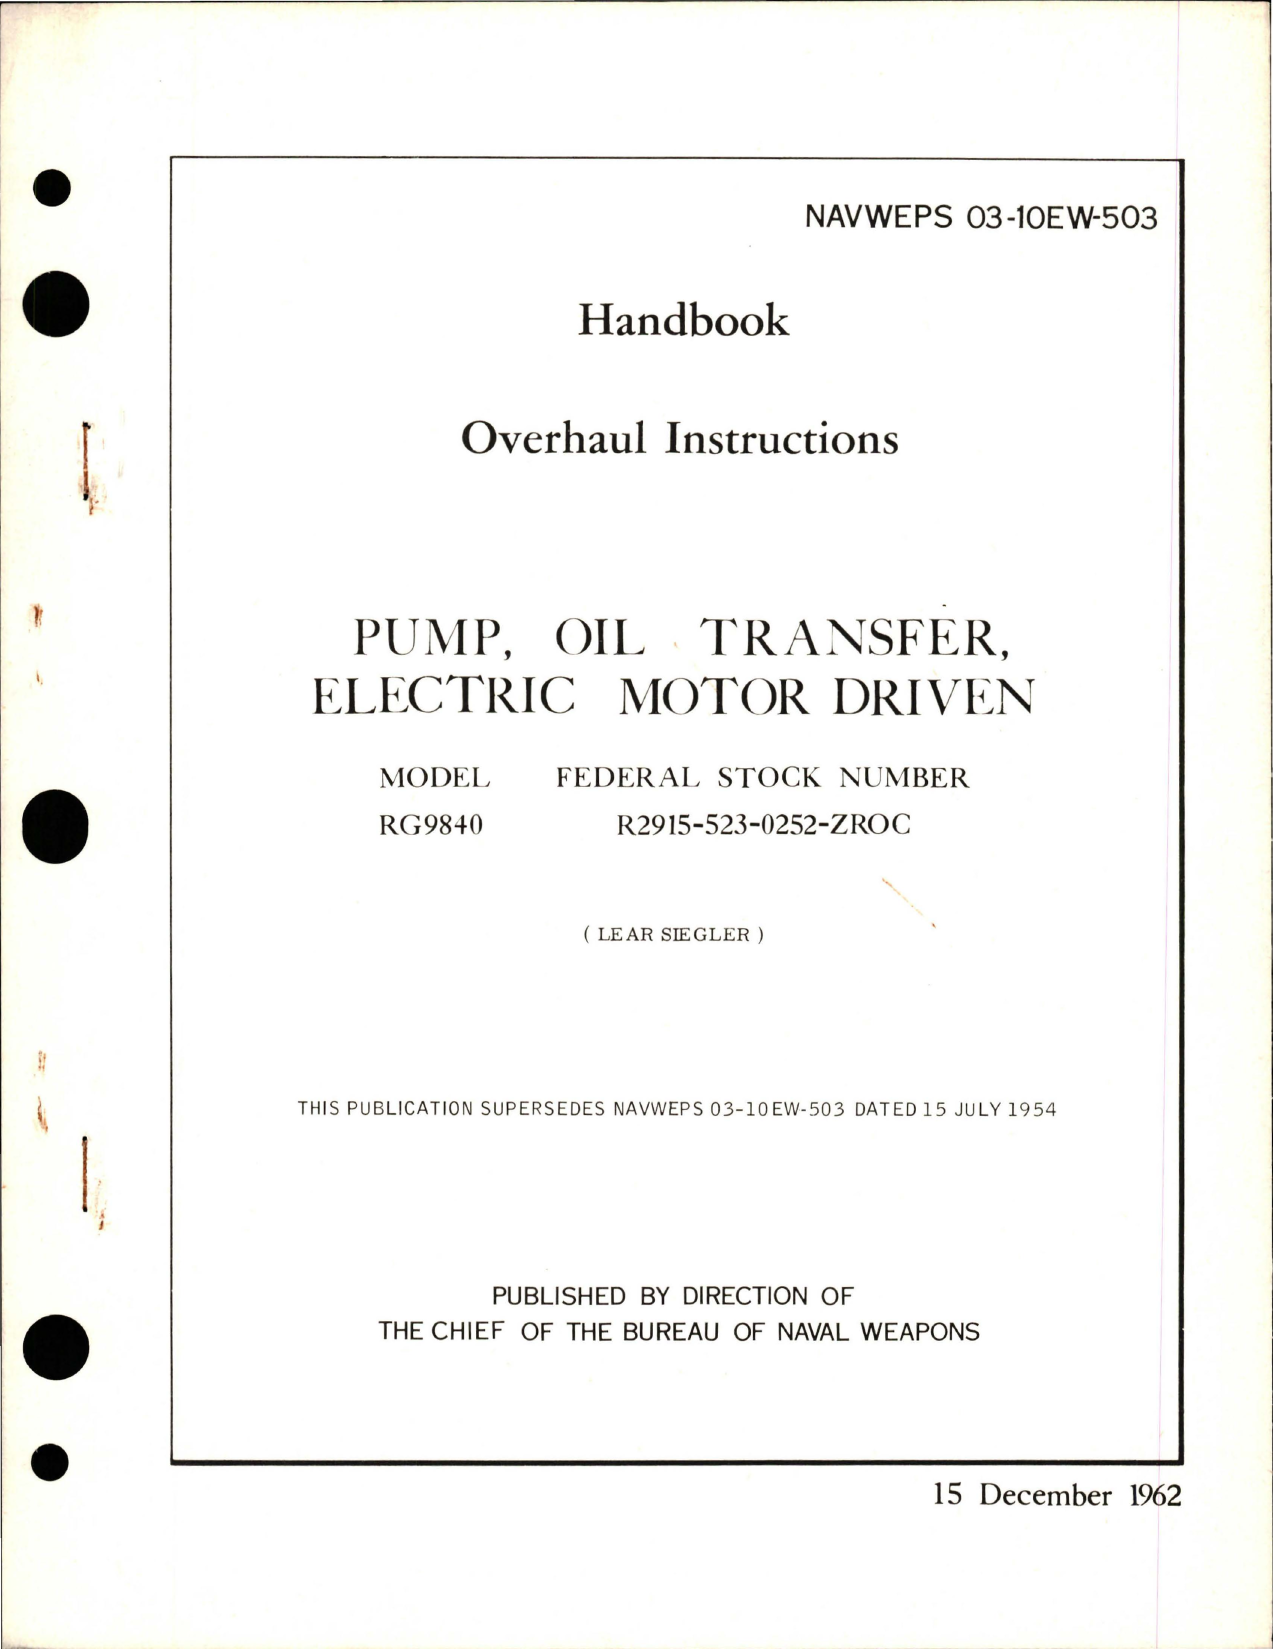 Sample page 1 from AirCorps Library document: Overhaul Instructions for Electric Motor Driven Oil Transfer Pump - Model RG984